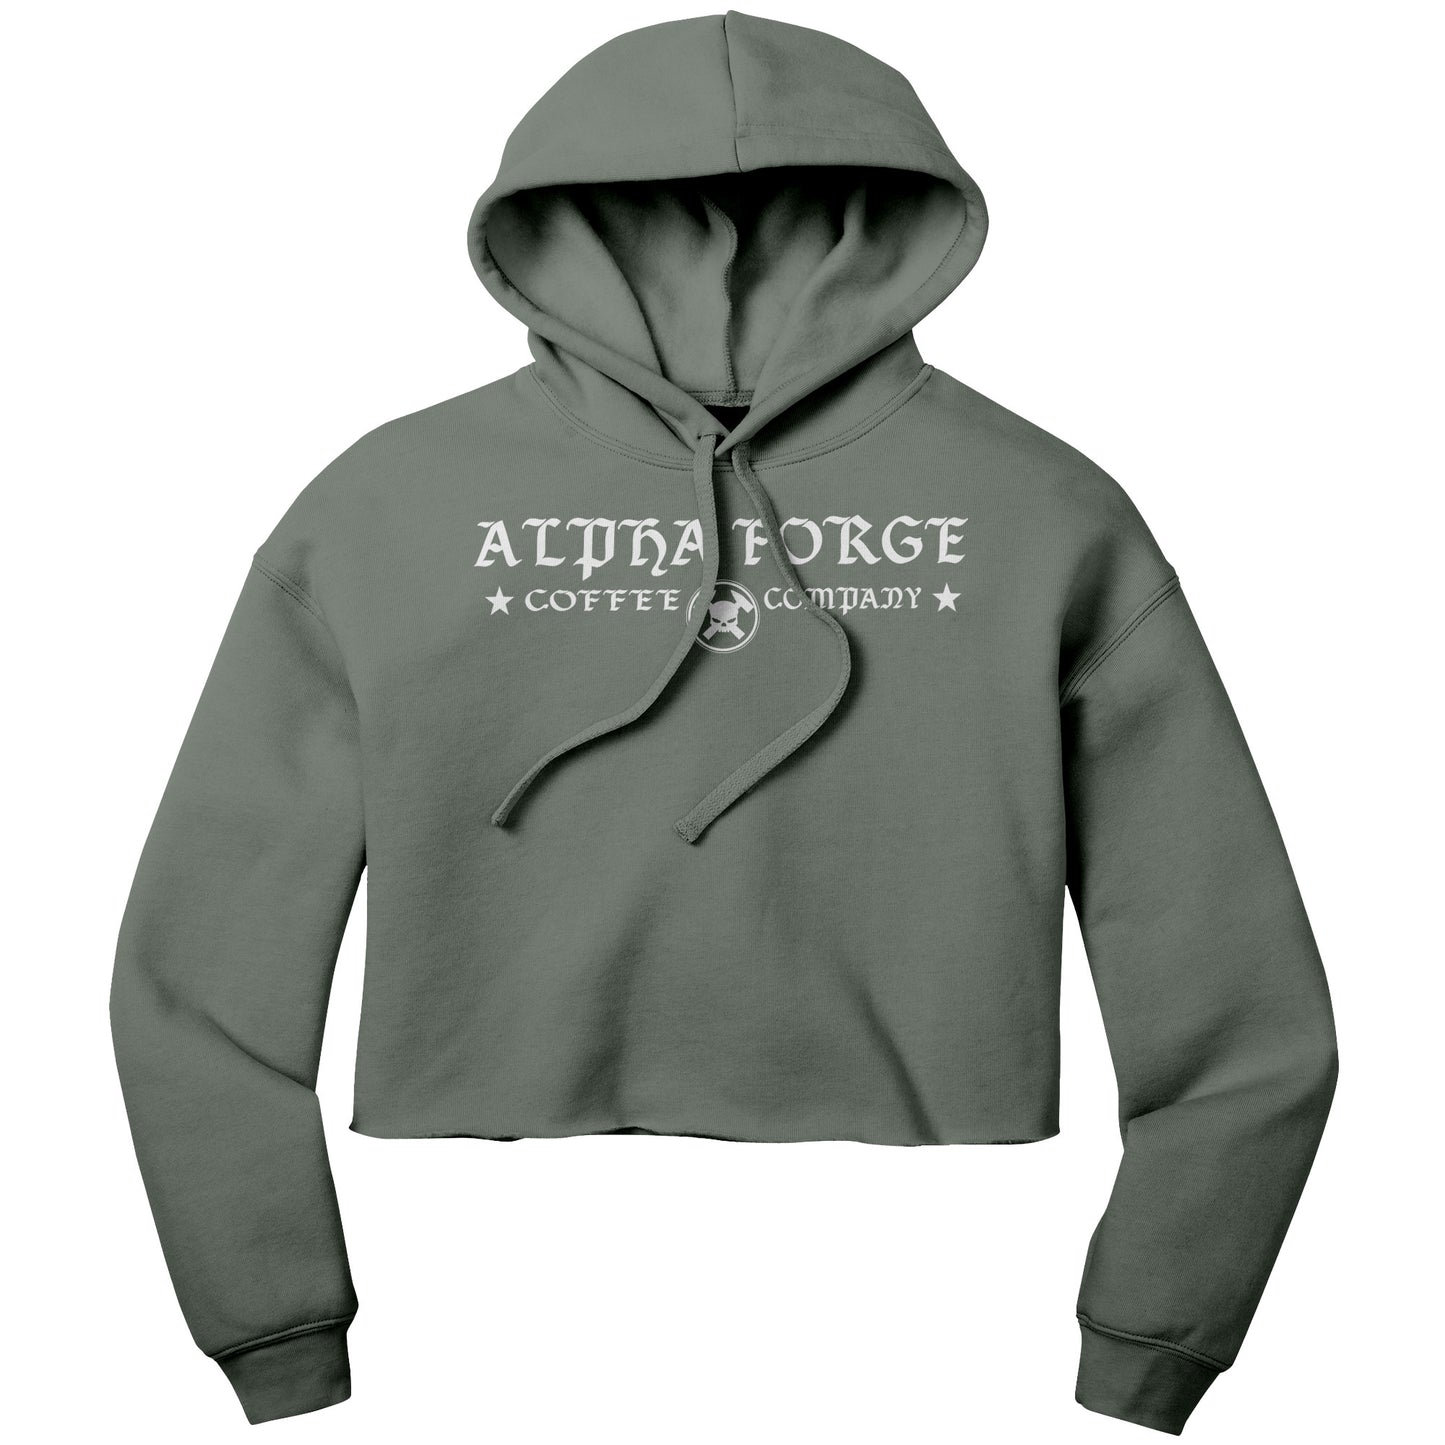 Alpha Forge Coffee Co. Women's Cropped Hoodie